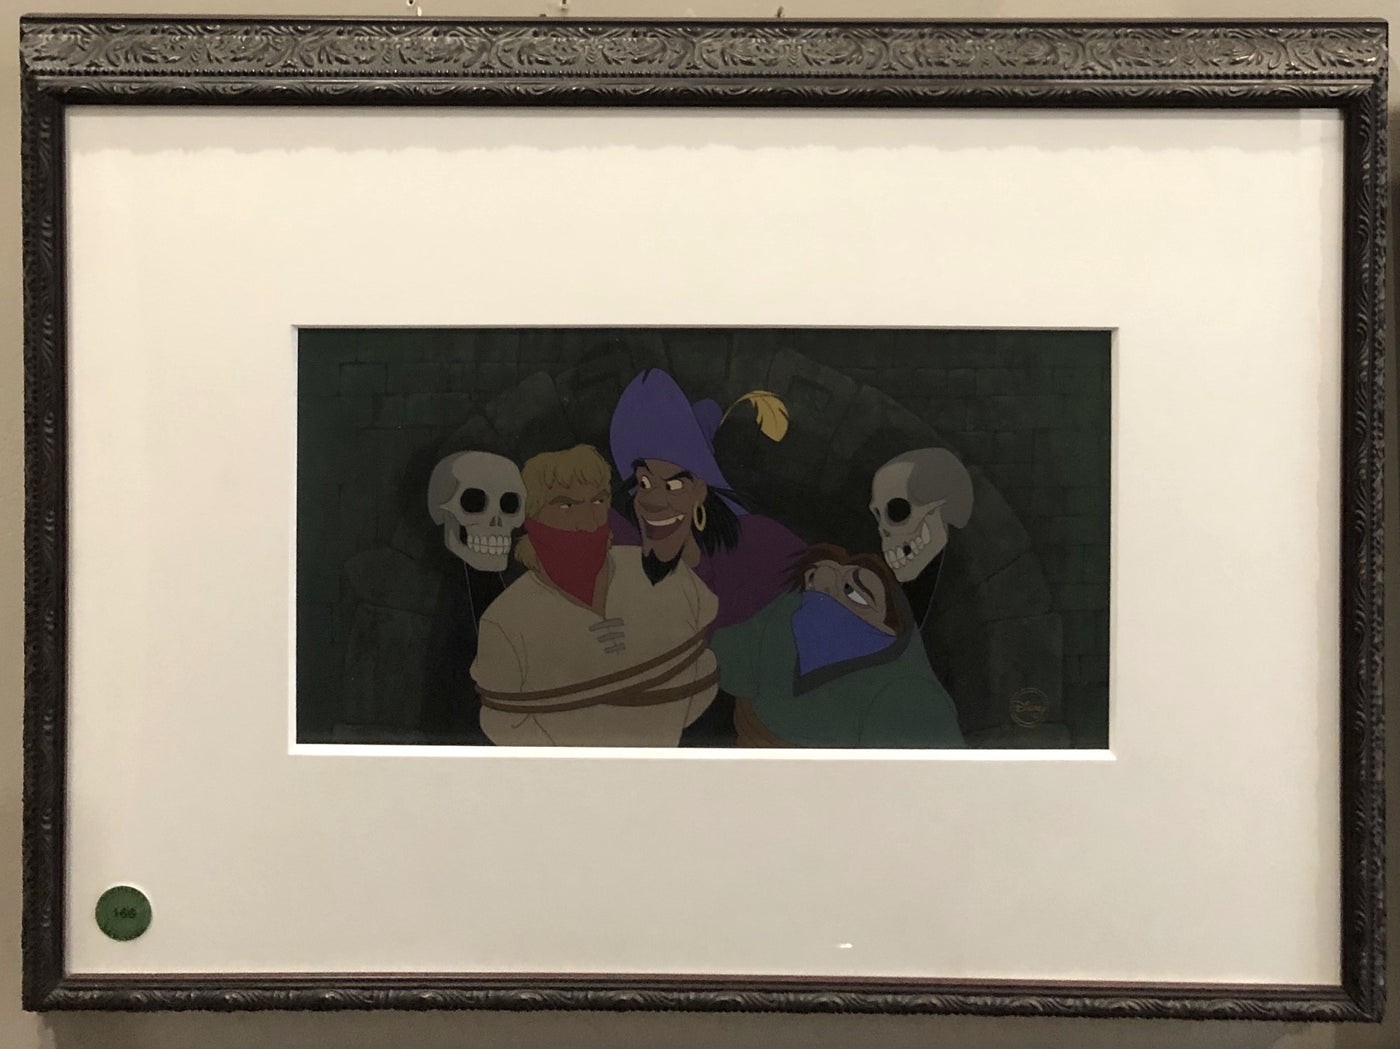 Original Walt Disney One of a Kind Hand-Inked and Hand-Painted Cel on Production Background from The Hunchback of Notre Dame featuring Quasimodo, Phoebus, and Clopin